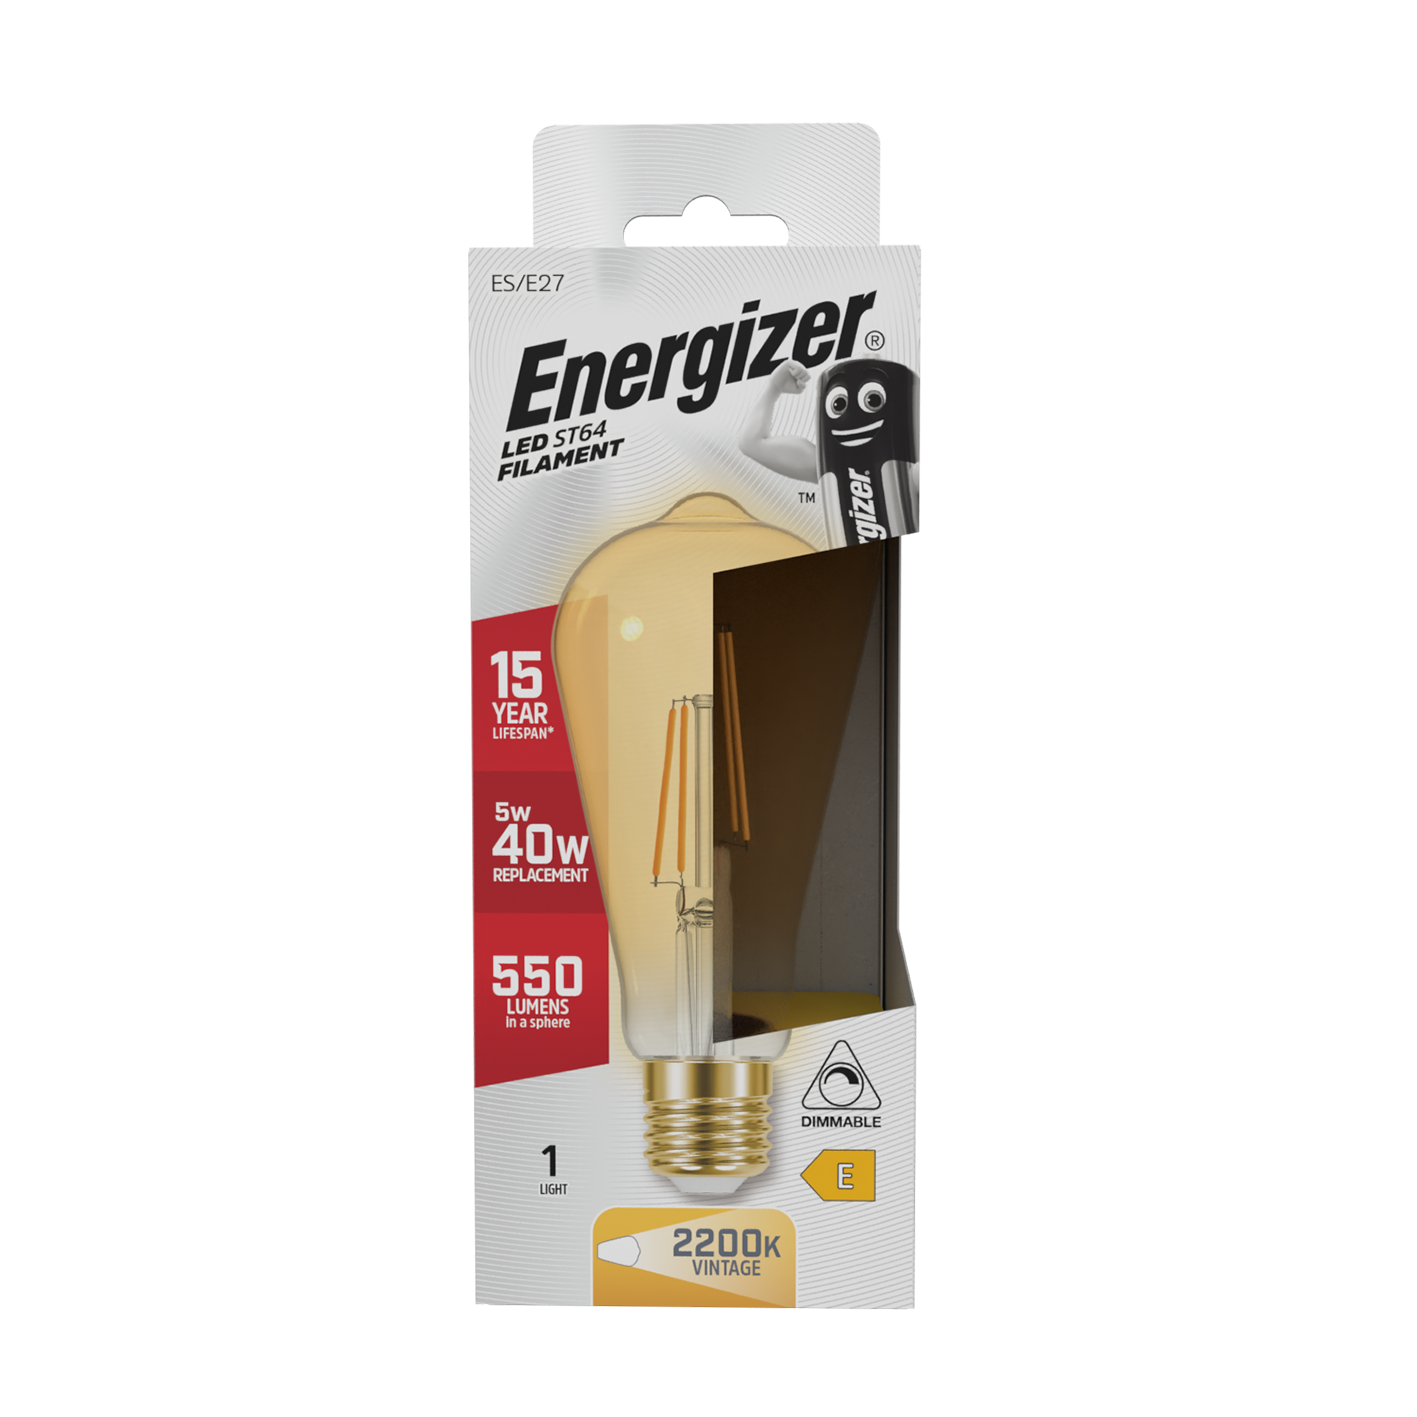 Energizer LED Filament Gold ST64 E27 (ES) 550 Lumens 5W 2,200K (Warm White) Dimmable, Box of 1